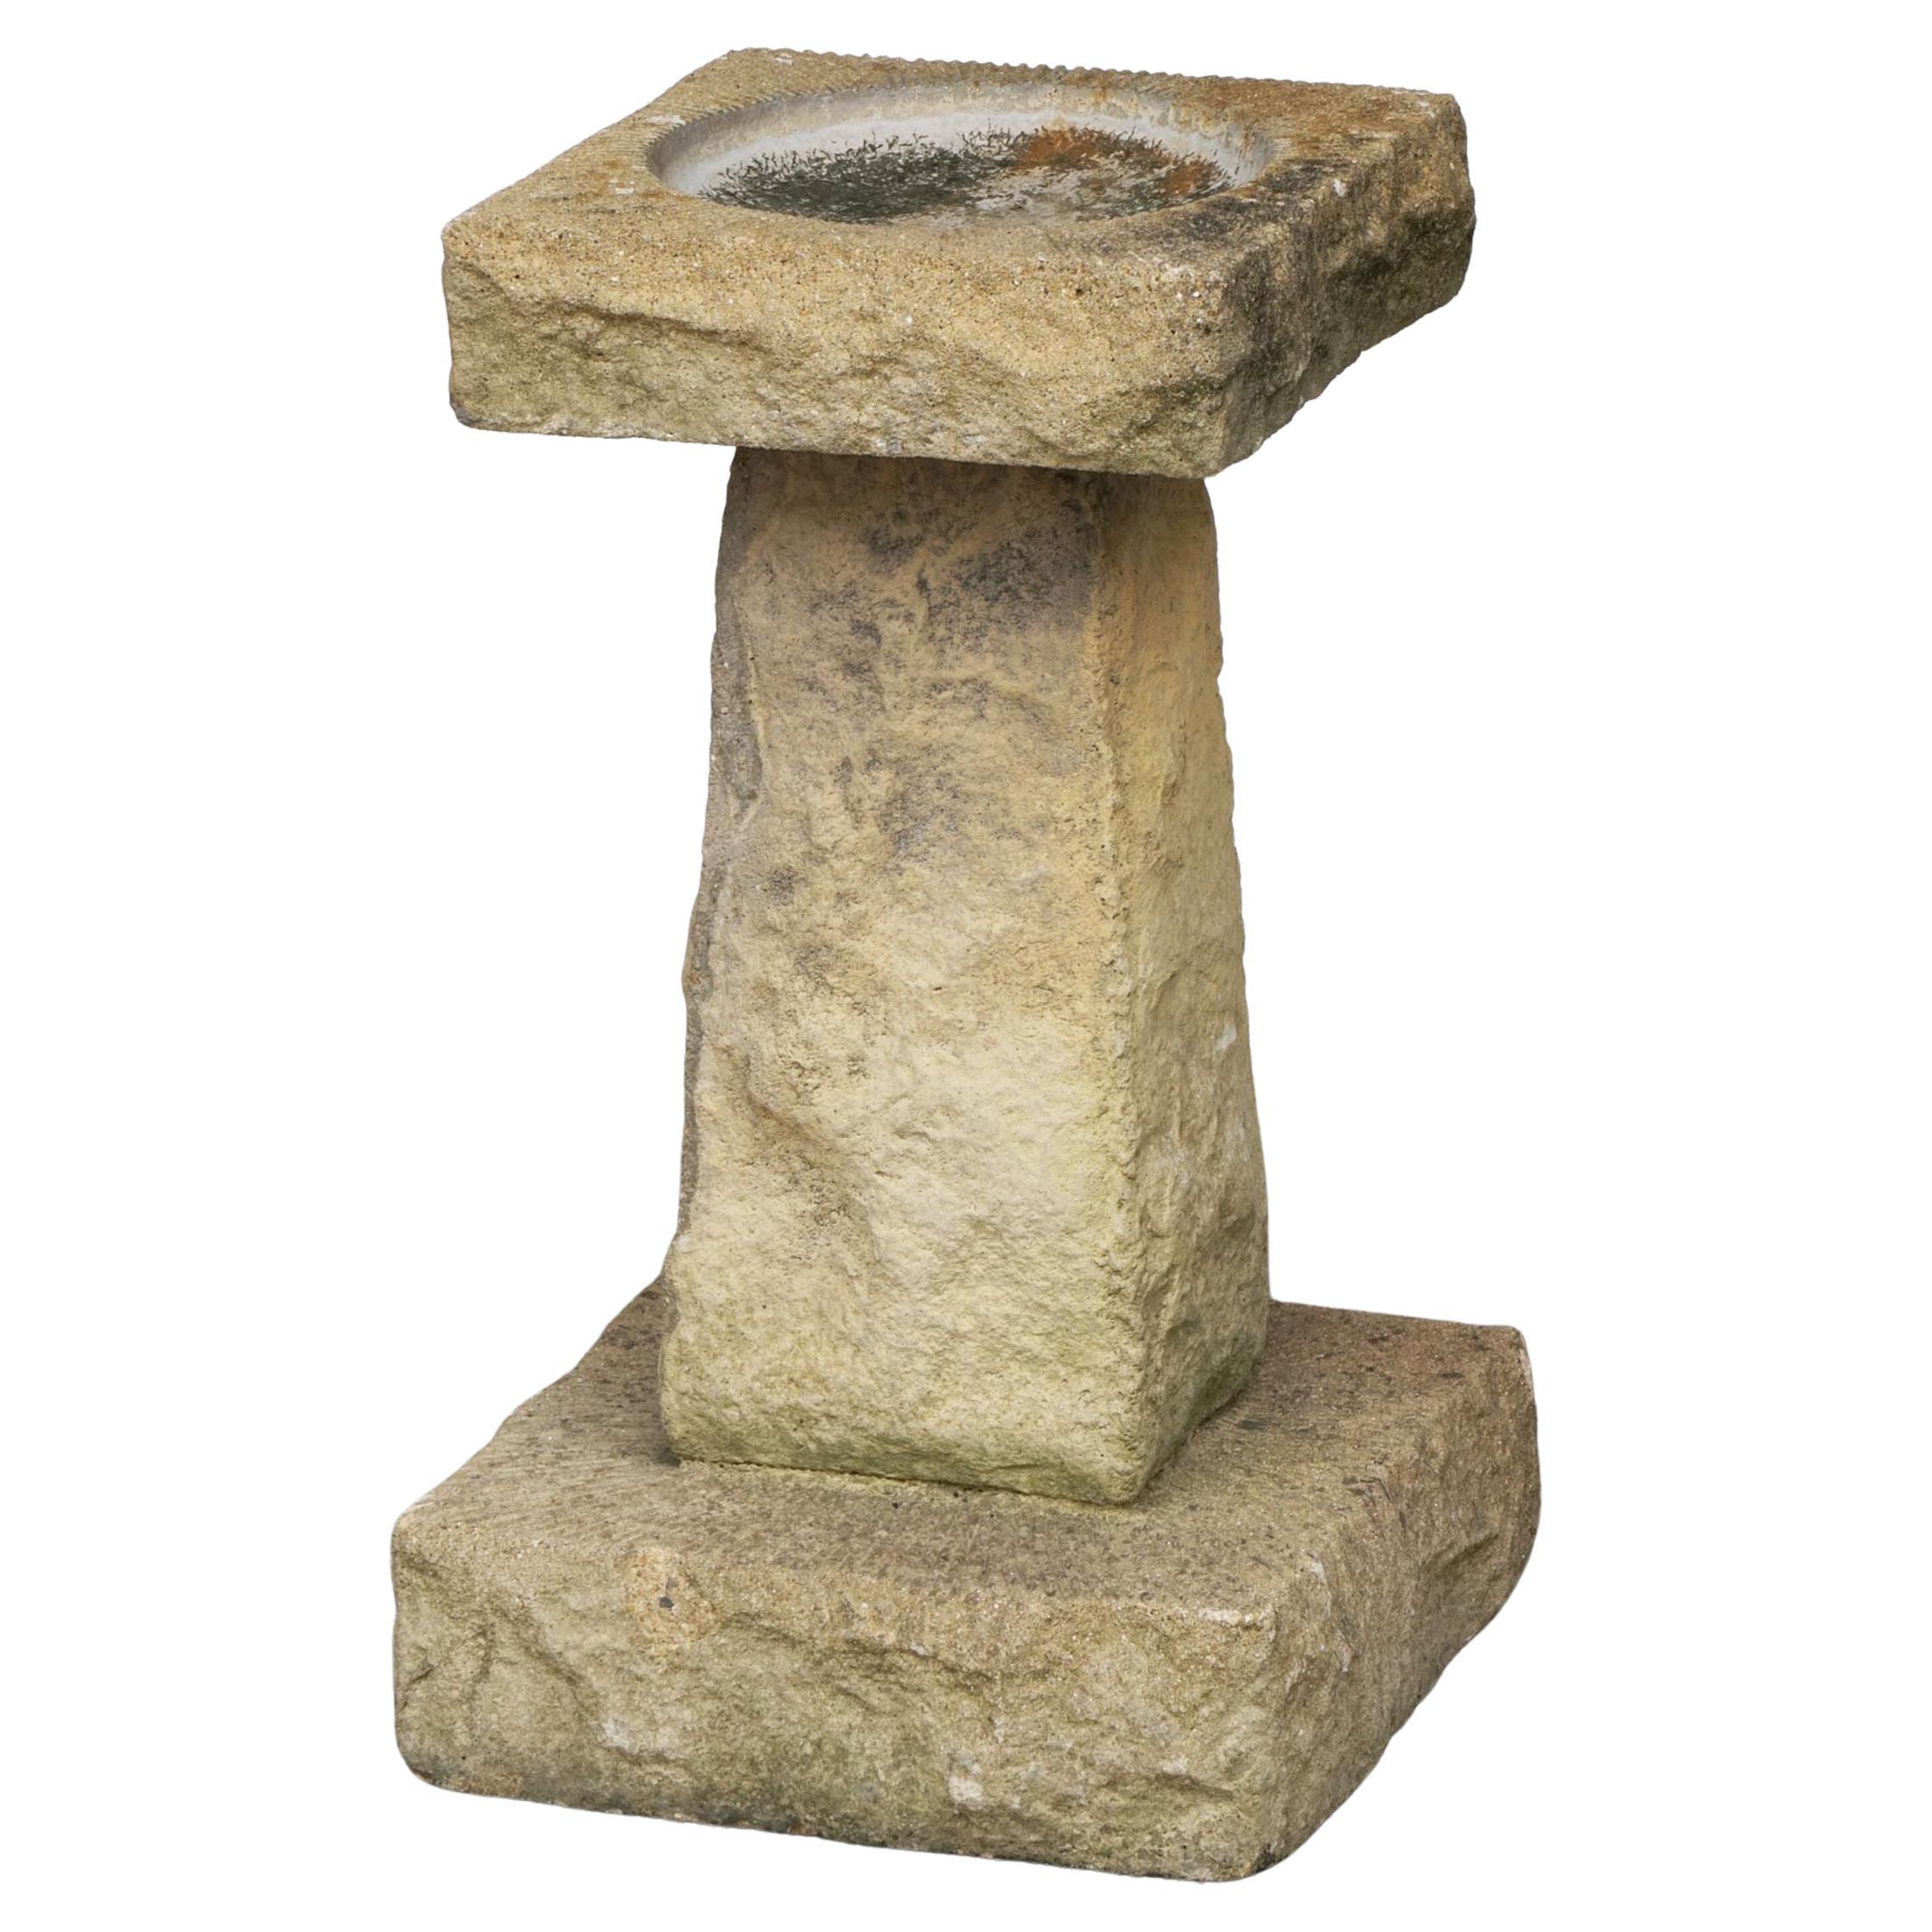 A fine English garden bird bath of cut hamstone, featuring a square top with round recessed bath area in the center, set upon a four-sided pedestal with square plinth base. The top and base with an etched radiating design.

Hamstone is the name